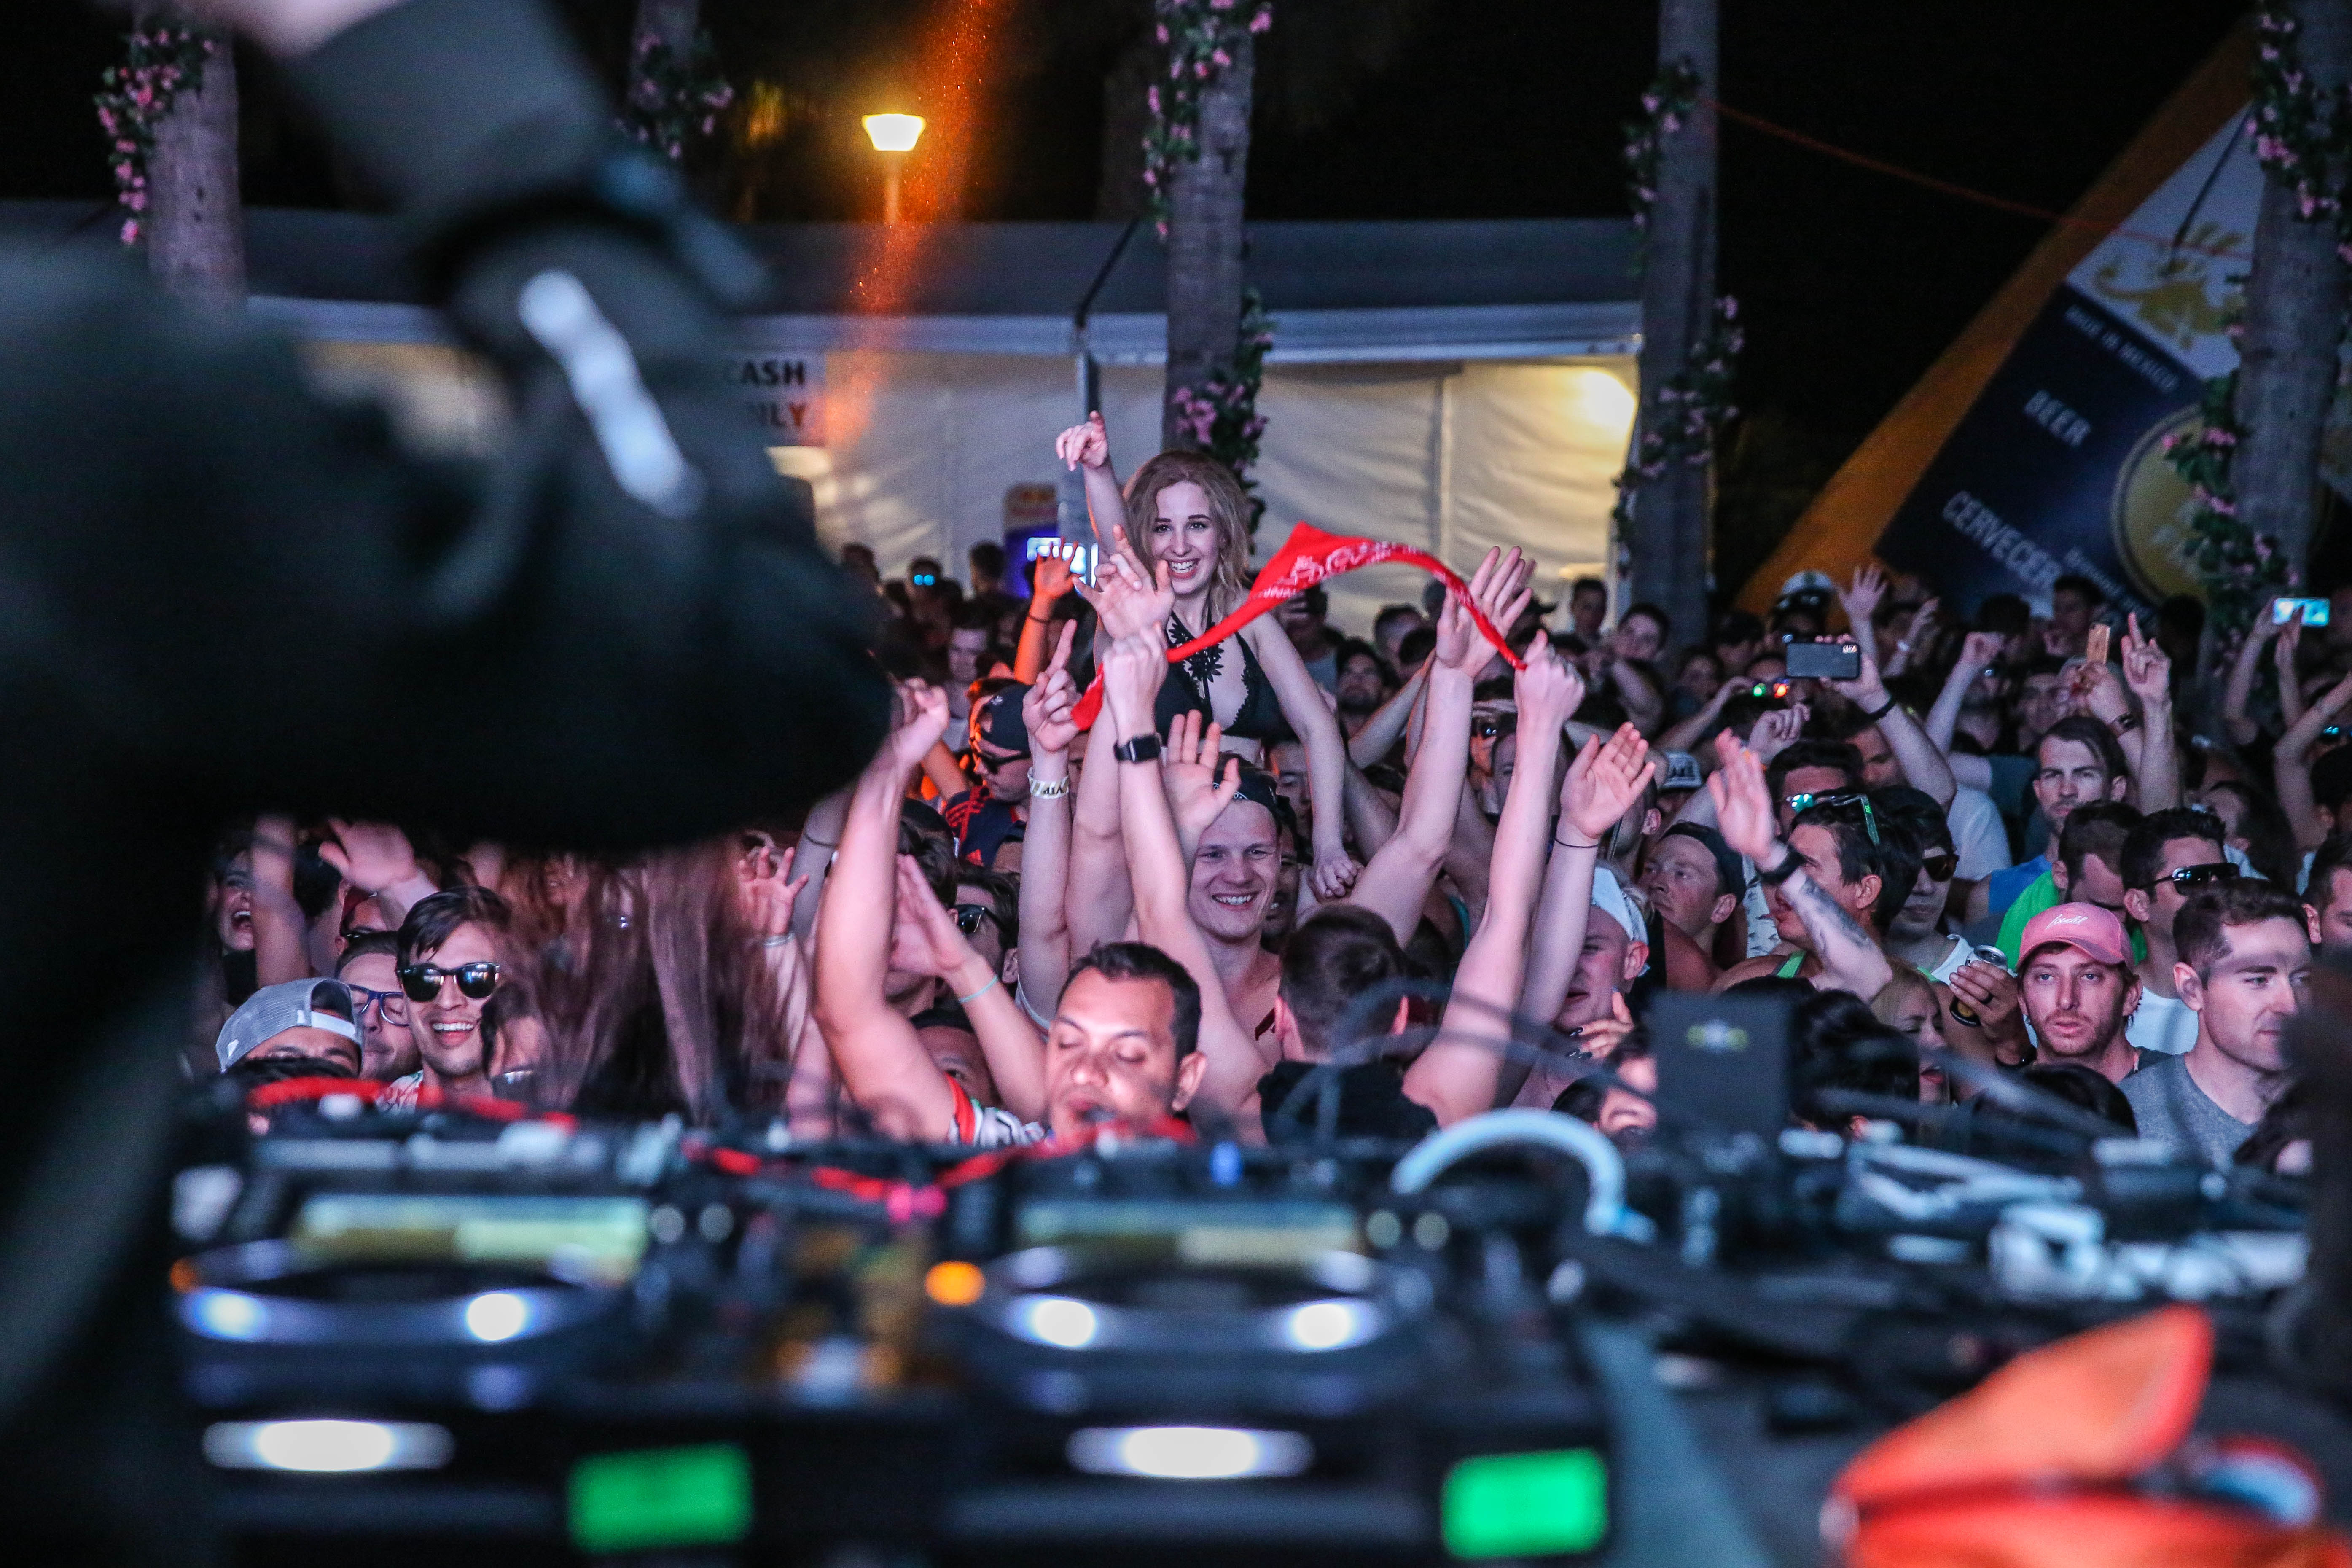 34 insanely amazing snaps from DJ Mag's Miami pool party